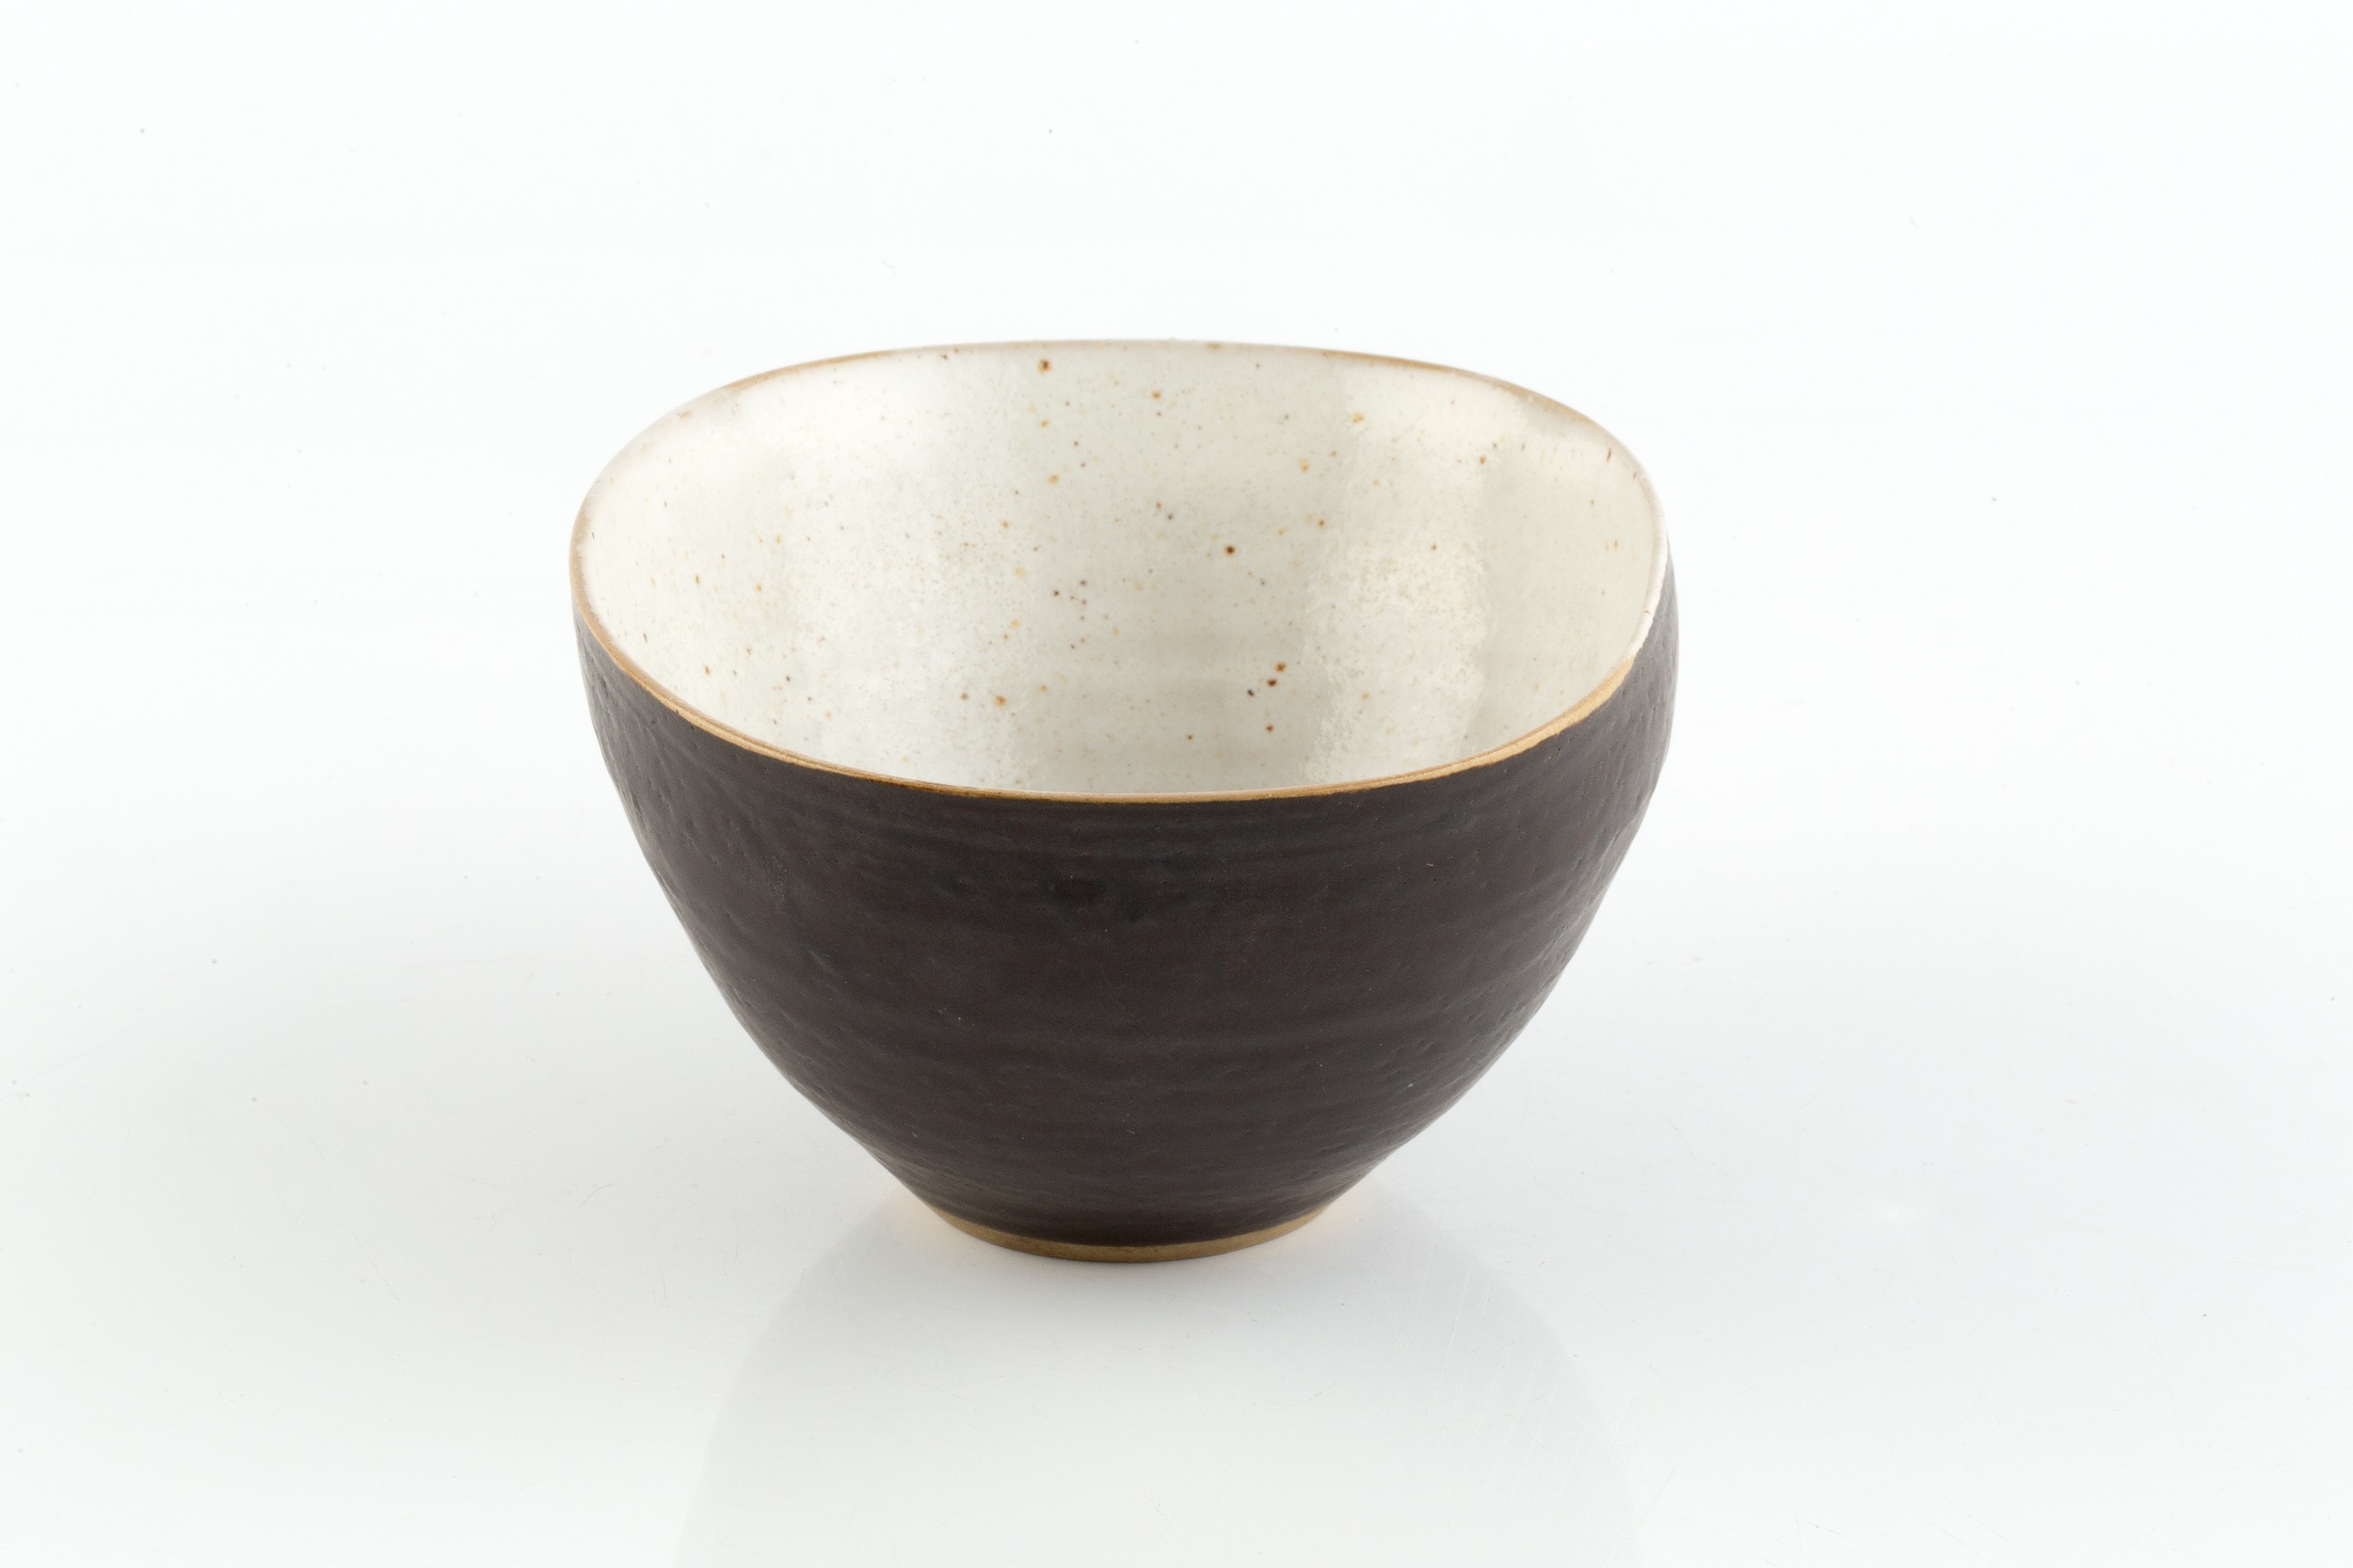 Lucie Rie (1902-1995) Squared bowl manganese glaze impressed potter's seal 7.6cm high, 15.8cm wide. - Image 6 of 6